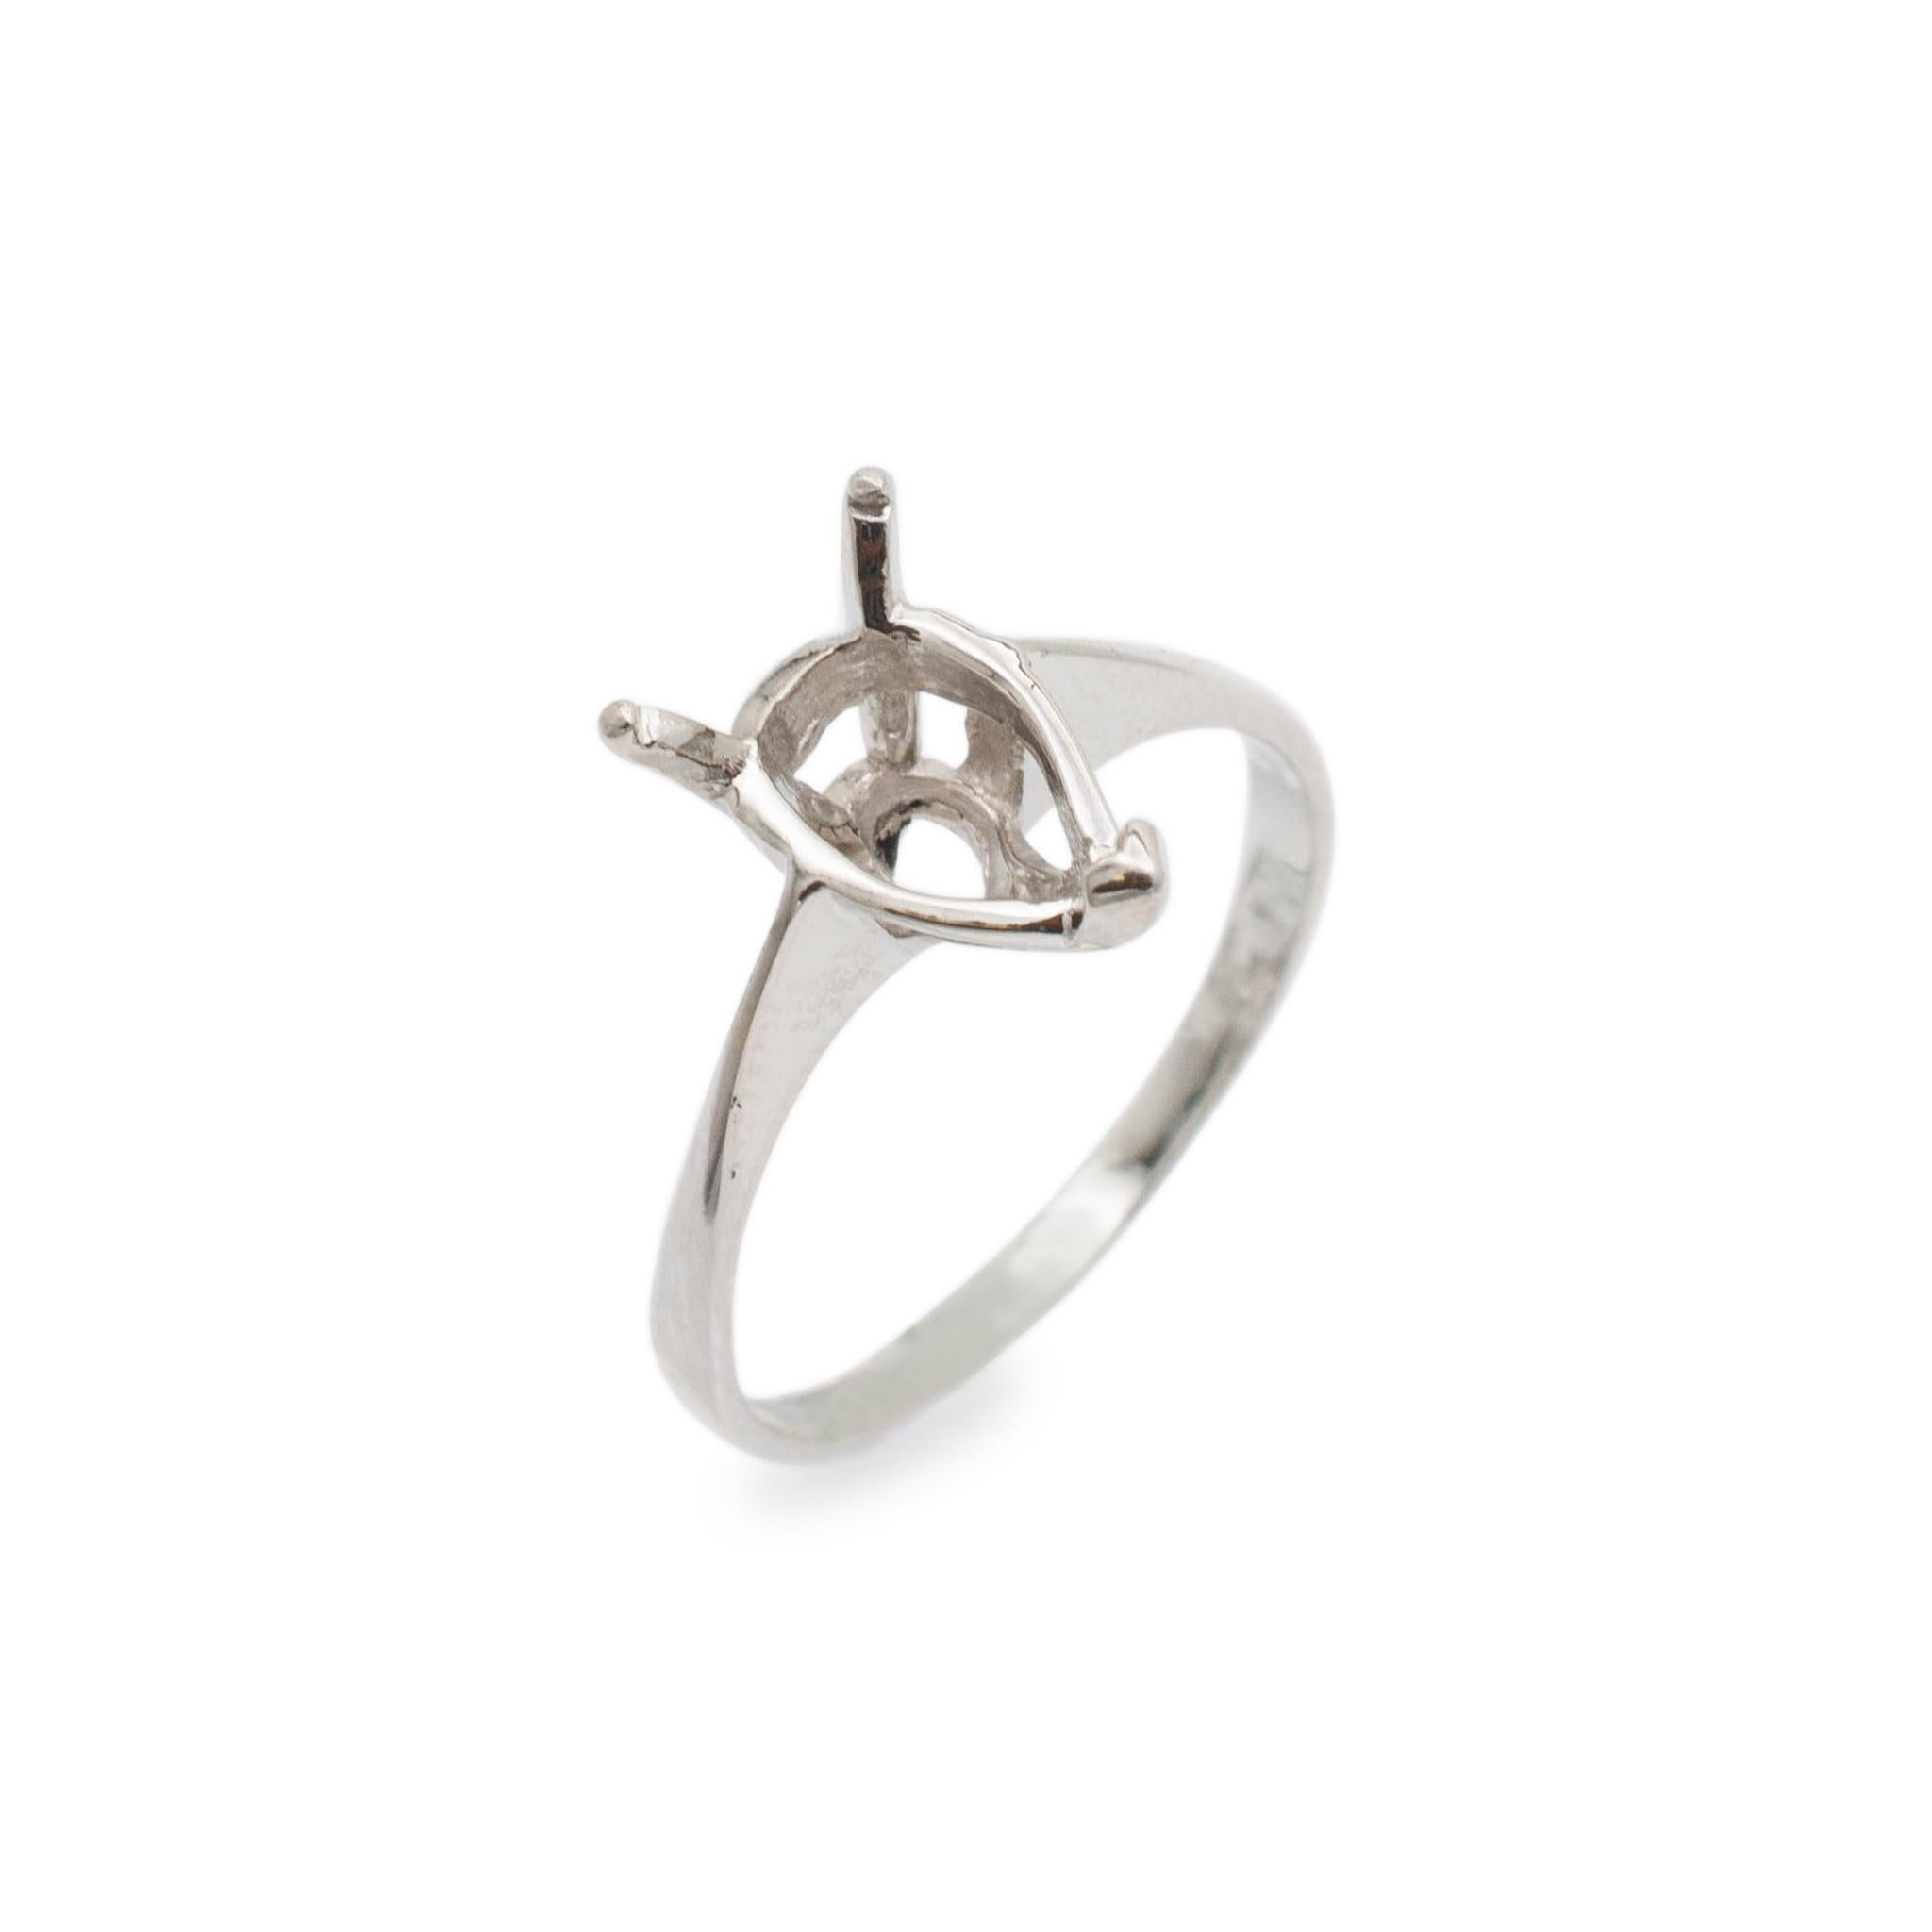 Gender: Ladies

Metal Type: 14K White Gold

Size: 8.75

Shank Maximum Width: 2.20 mm 

Weight: 2.60 grams

Ladies 14K white gold engagement semi-mount ring with a flat shank. The semi mount can accommodate a pear shaped stone measures between 9.5m